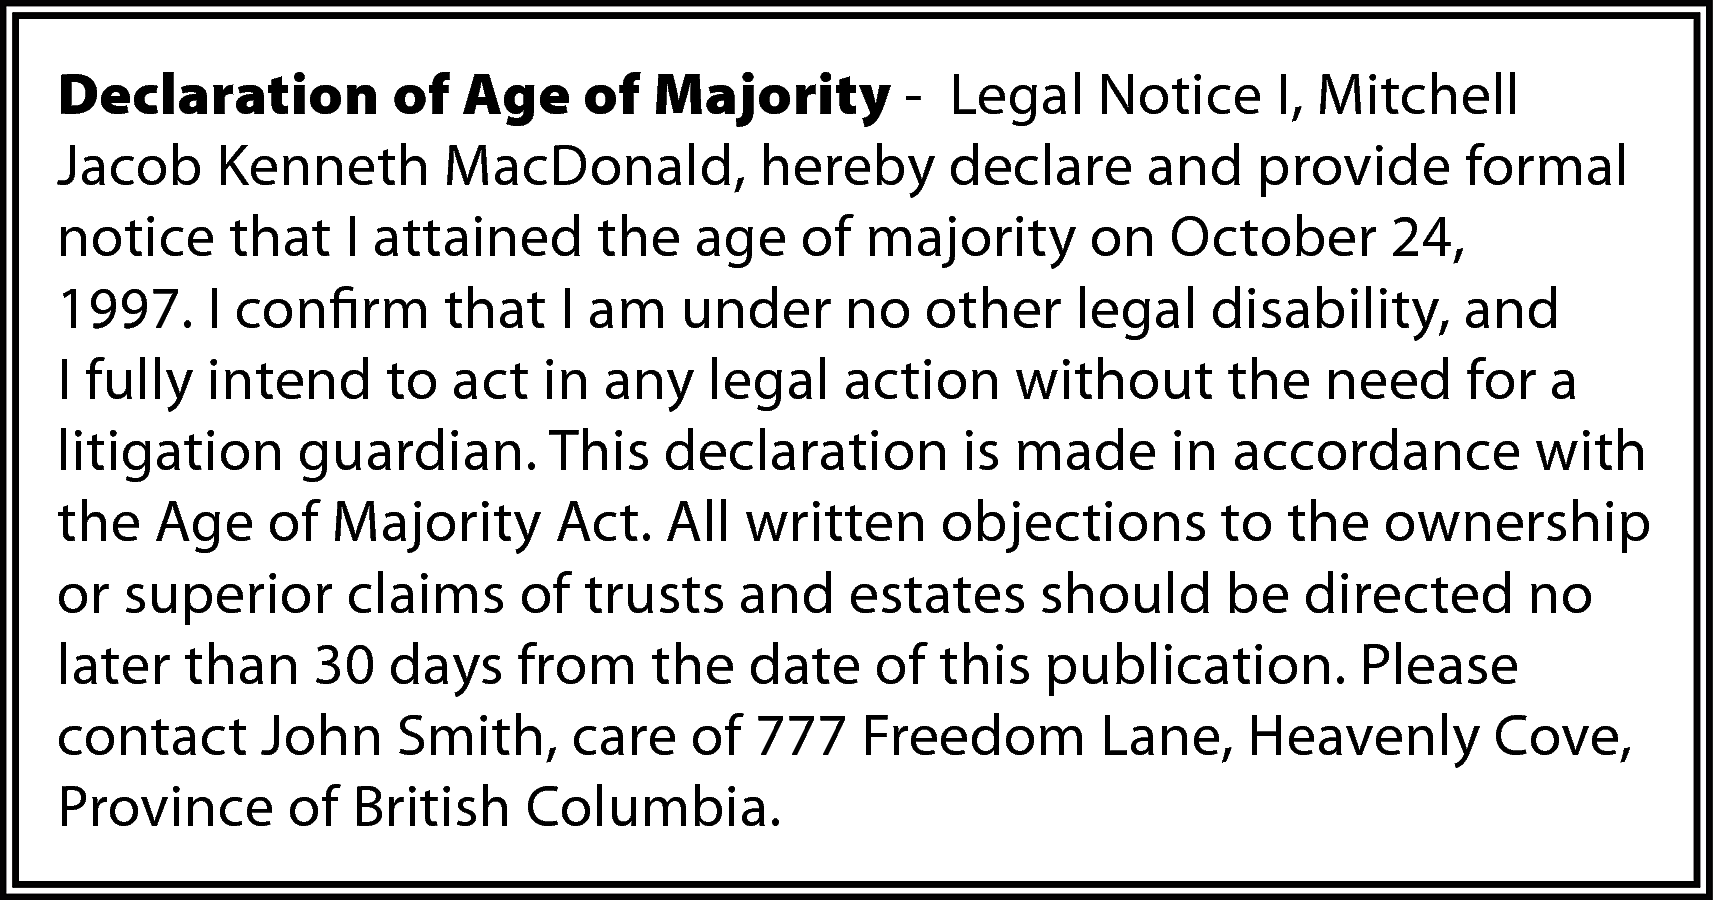 Declaration of Age of Majority  Declaration of Age of Majority - Legal Notice I, Mitchell  Jacob Kenneth MacDonald, hereby declare and provide formal  notice that I attained the age of majority on October 24,  1997. I confirm that I am under no other legal disability, and  I fully intend to act in any legal action without the need for a  litigation guardian. This declaration is made in accordance with  the Age of Majority Act. All written objections to the ownership  or superior claims of trusts and estates should be directed no  later than 30 days from the date of this publication. Please  contact John Smith, care of 777 Freedom Lane, Heavenly Cove,  Province of British Columbia.    